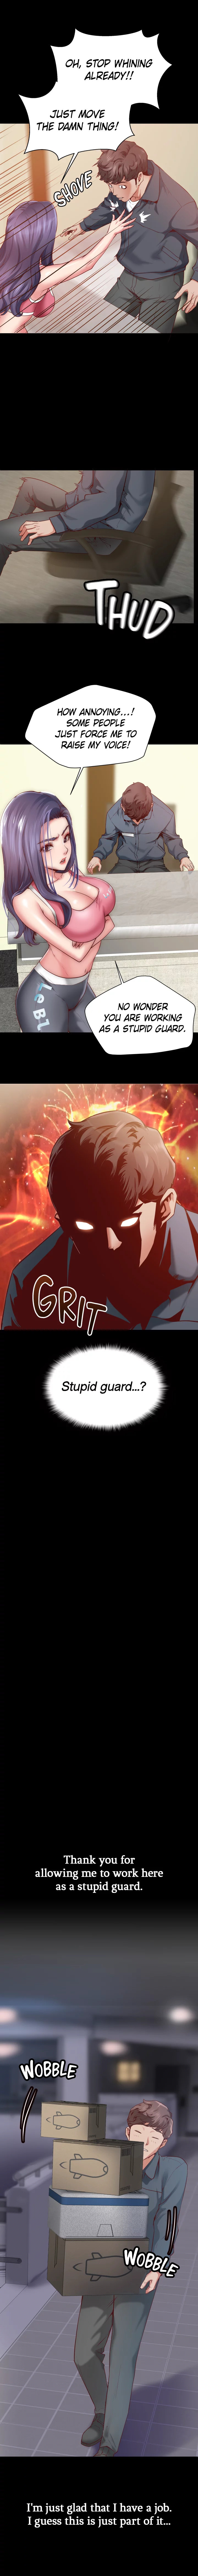 Wrath of the Underdog Chapter 1 - Page 4